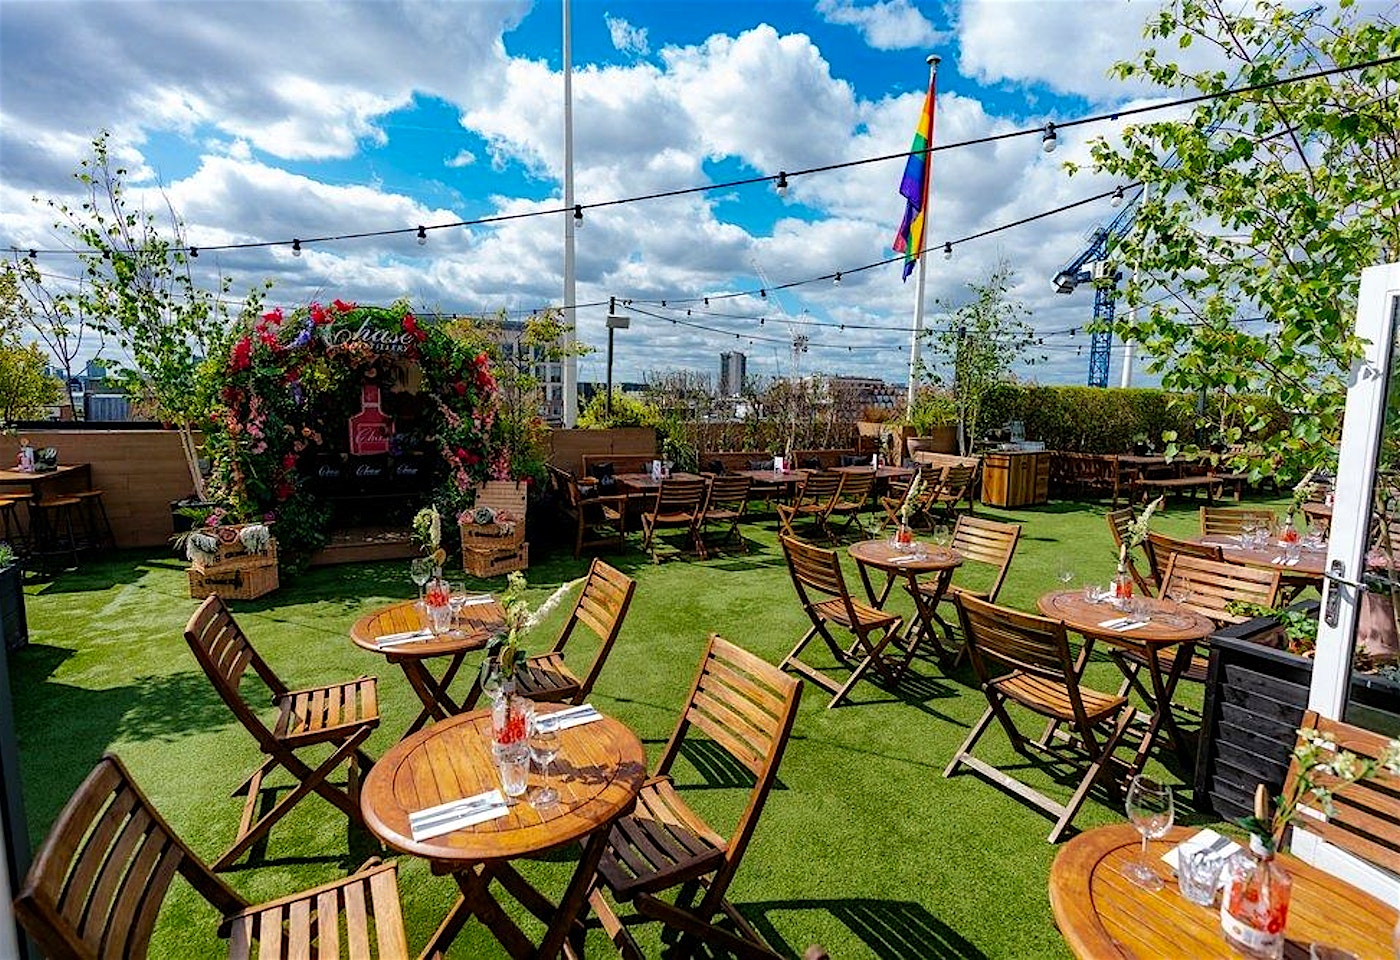 Willows Mayfair rooftop bars 1